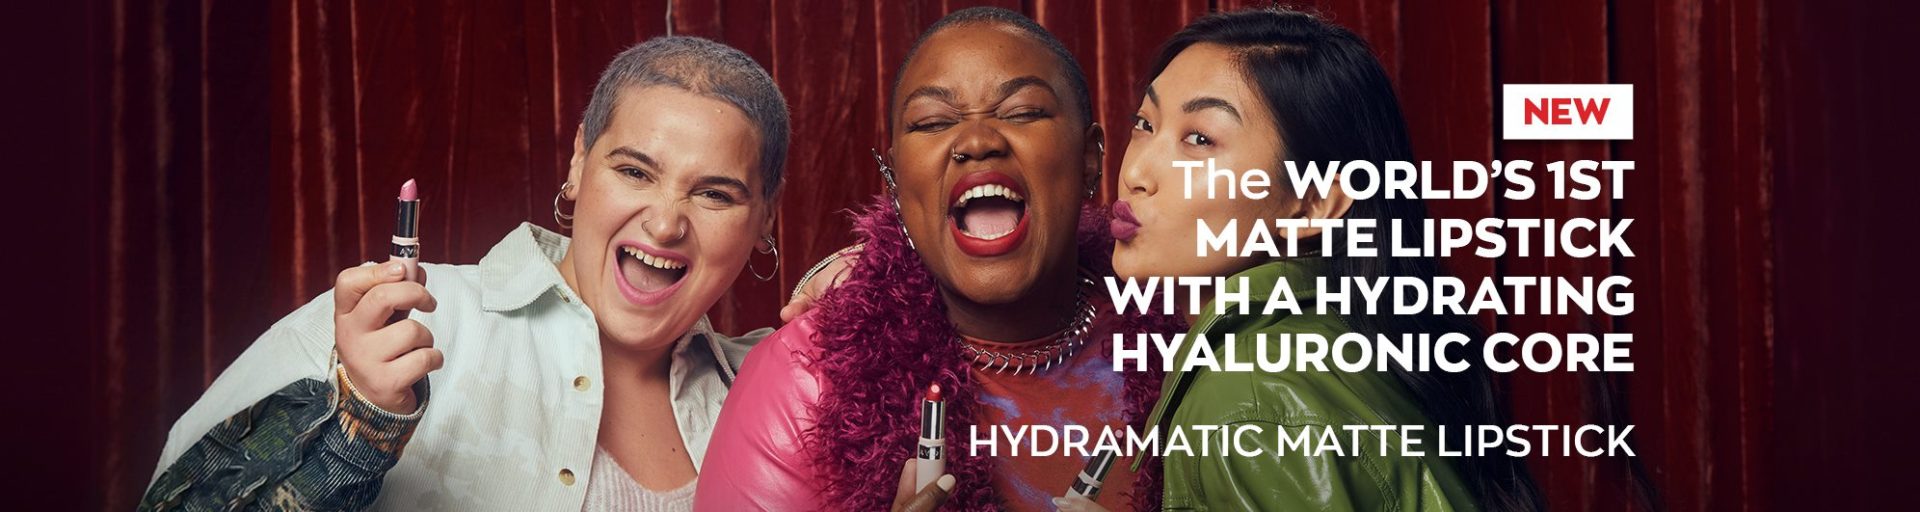 Avon launches world’s FIRST matte lipstick with a hydrating hyaluronic core! 3